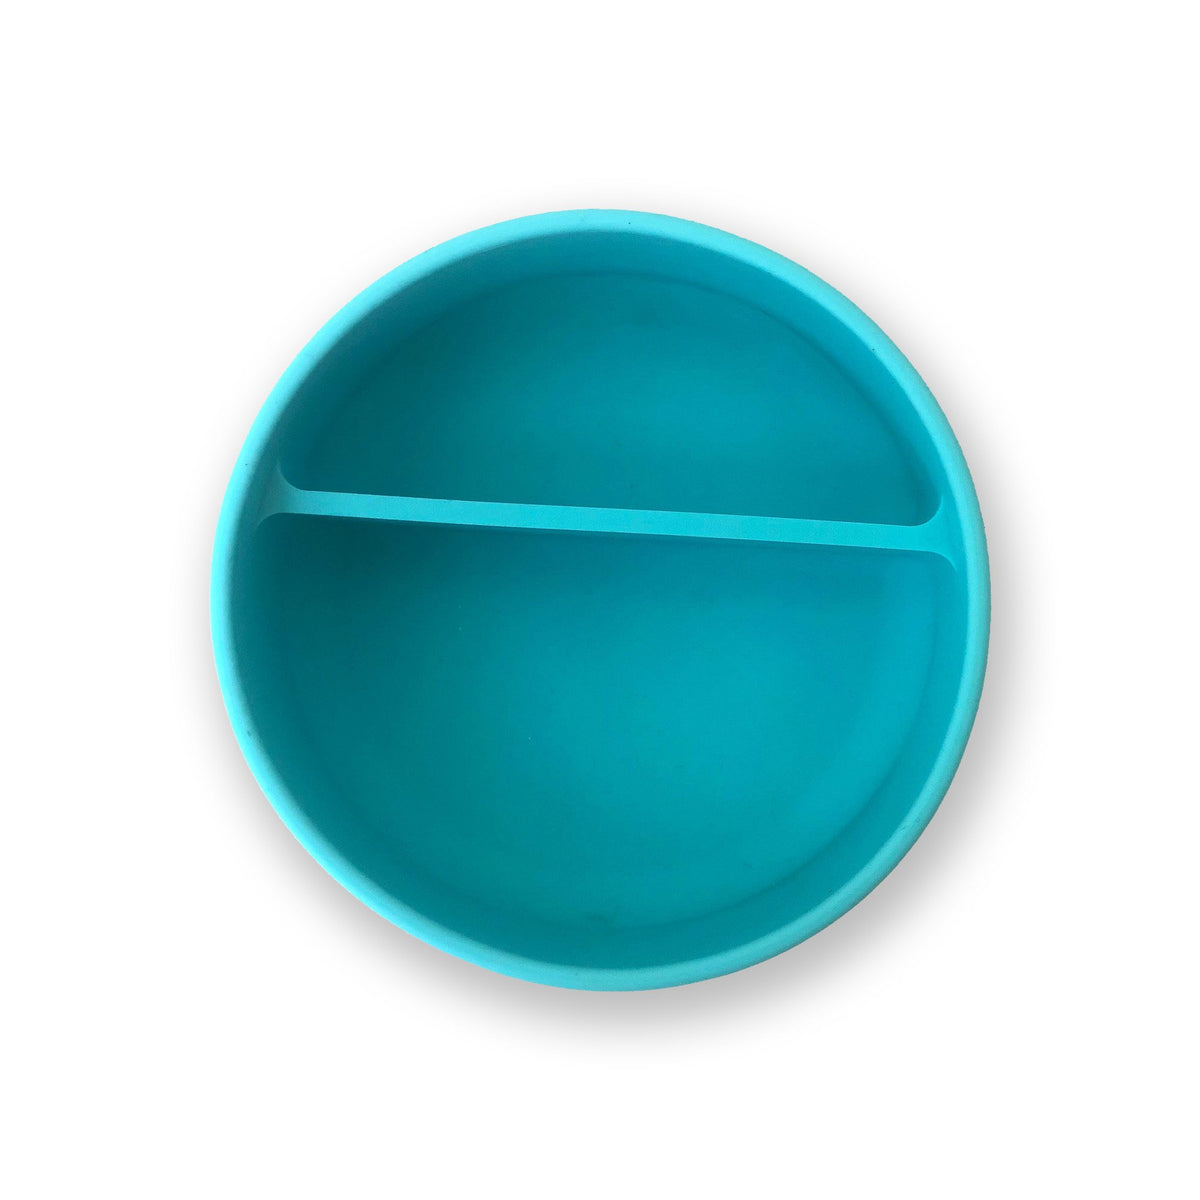 grabease-silicone-suction-bowl-teal- (3)